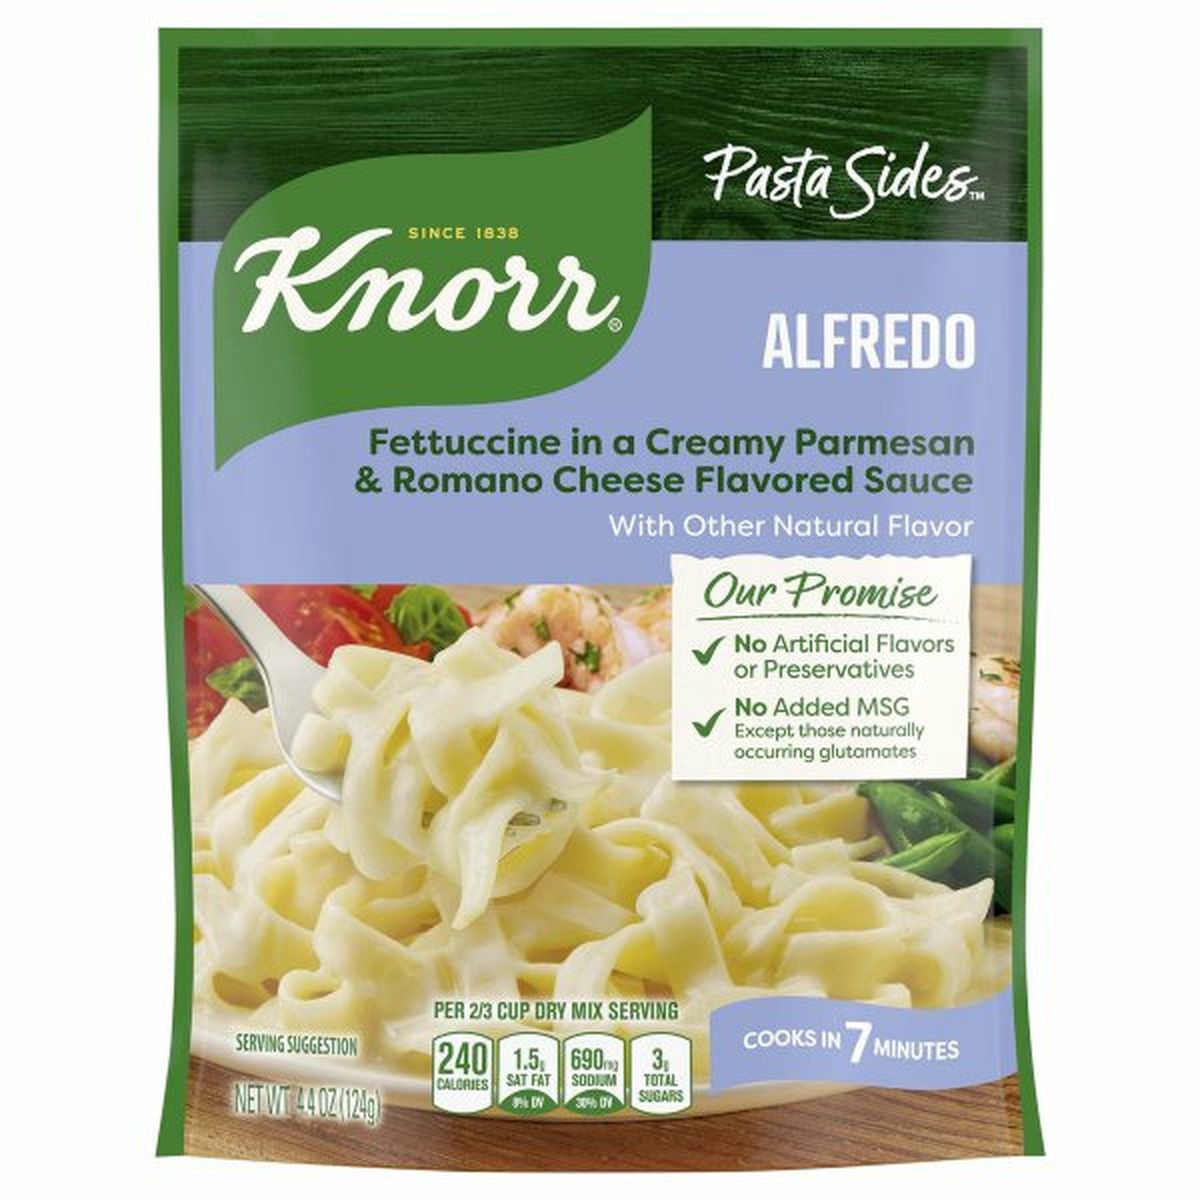 Calories in Knorr Pasta Sides, Alfredo